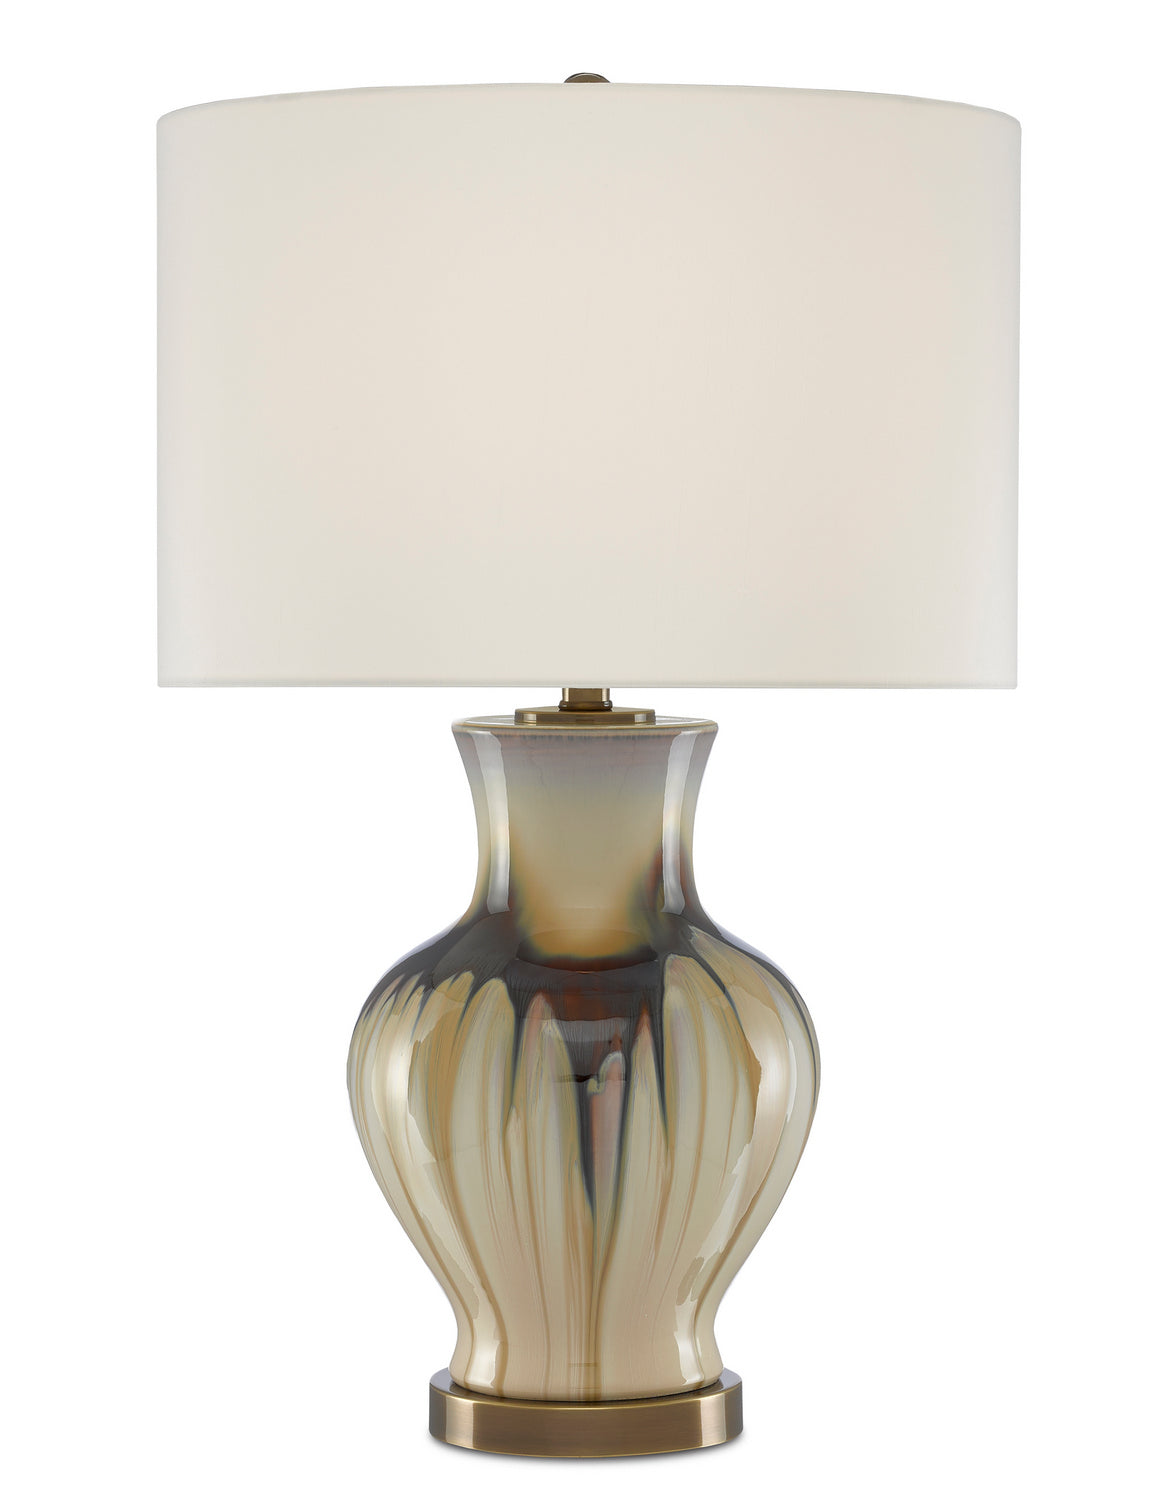 One Light Table Lamp from the Muscadine collection in Cream/Brown/Antique Brass finish